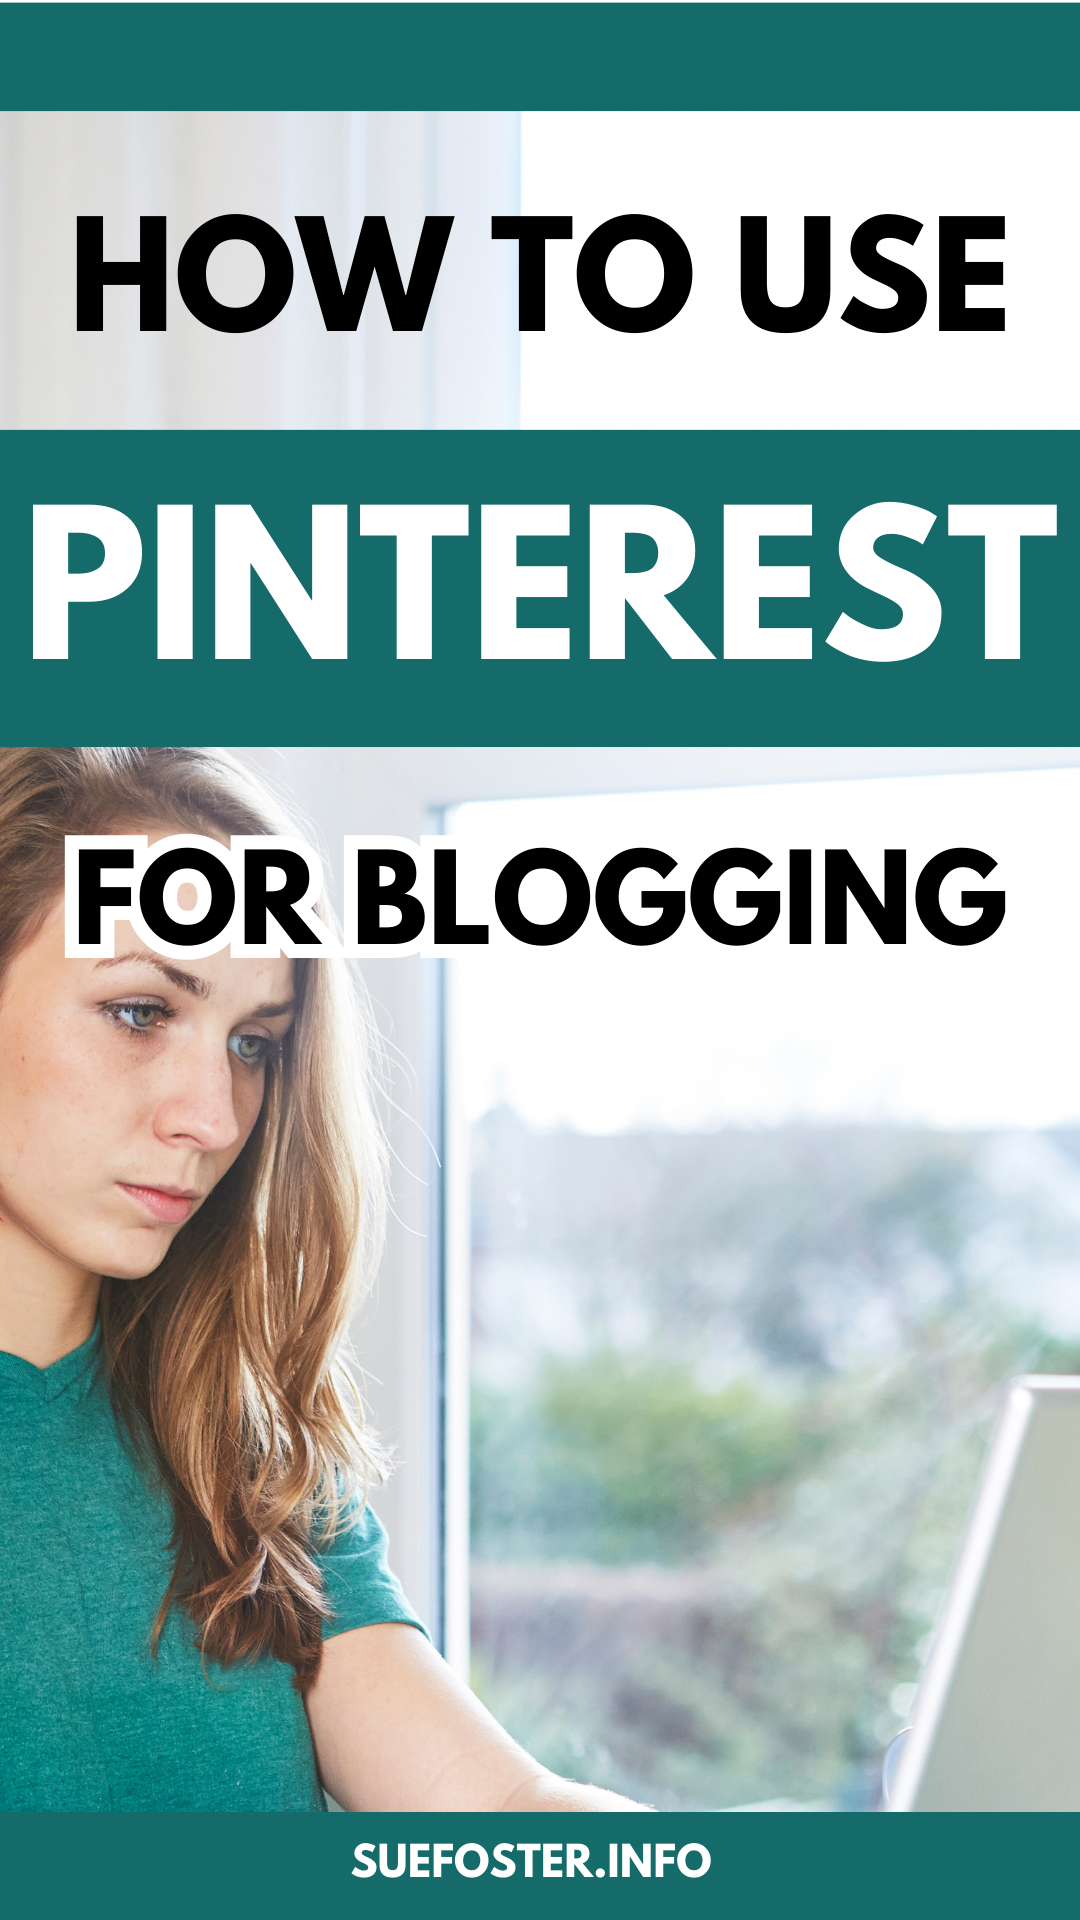 How-to-use-Pinterest-for-blogging